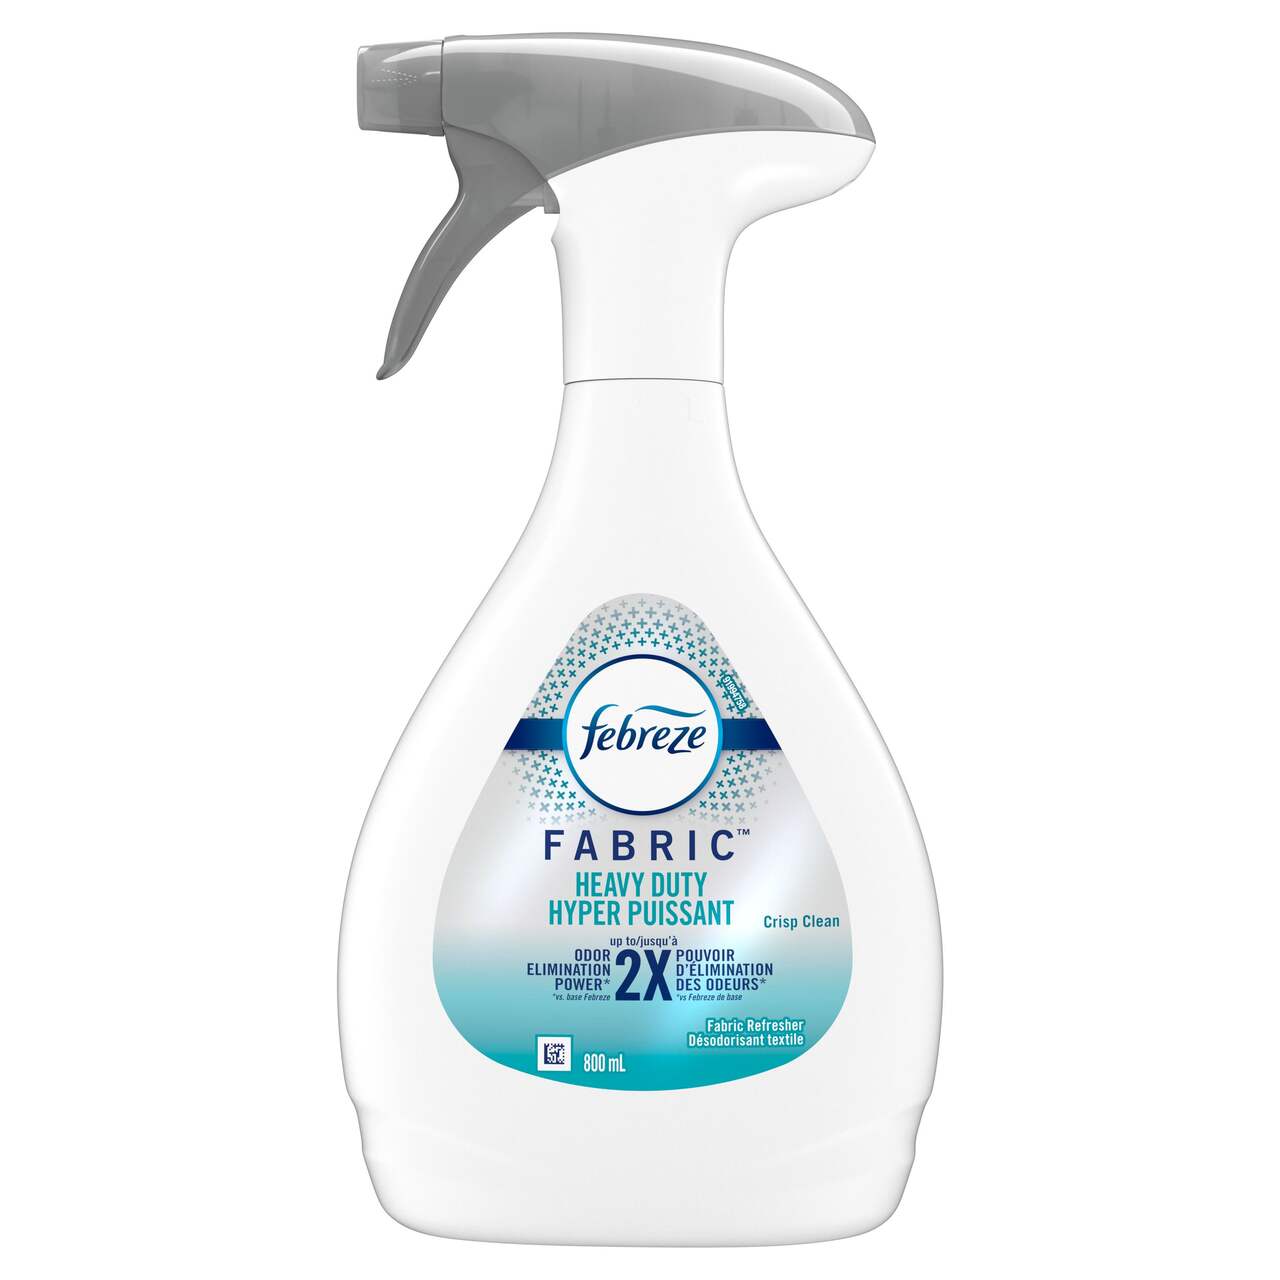 https://media-www.canadiantire.ca/product/living/home-essentials/laundry-hand-dish-cleaning-solutions/0532924/febreze-fabric-refresher-heavvy-duty-800ml-f4ae7783-c99d-4128-a838-f3defe895285-jpgrendition.jpg?imdensity=1&imwidth=640&impolicy=mZoom